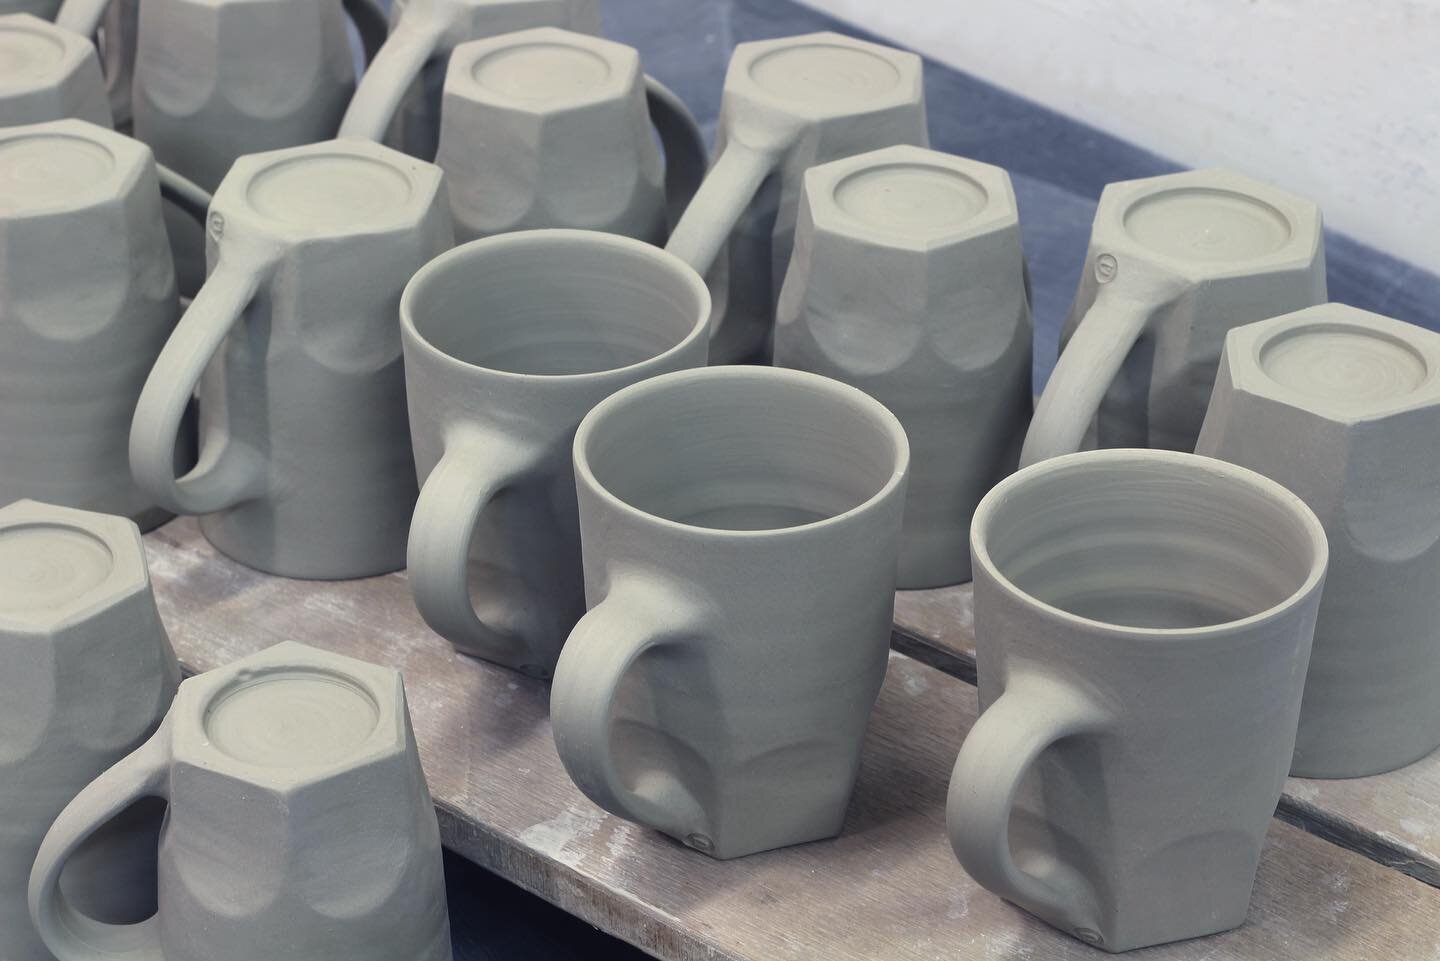 Finished mugs with the final step being the small lug of clay backfilling the handle to soften the appearance of the join.
The mugs are thrown with 450grams of clay, which feels excessive for there scale, but the reason being is the amount needed tha